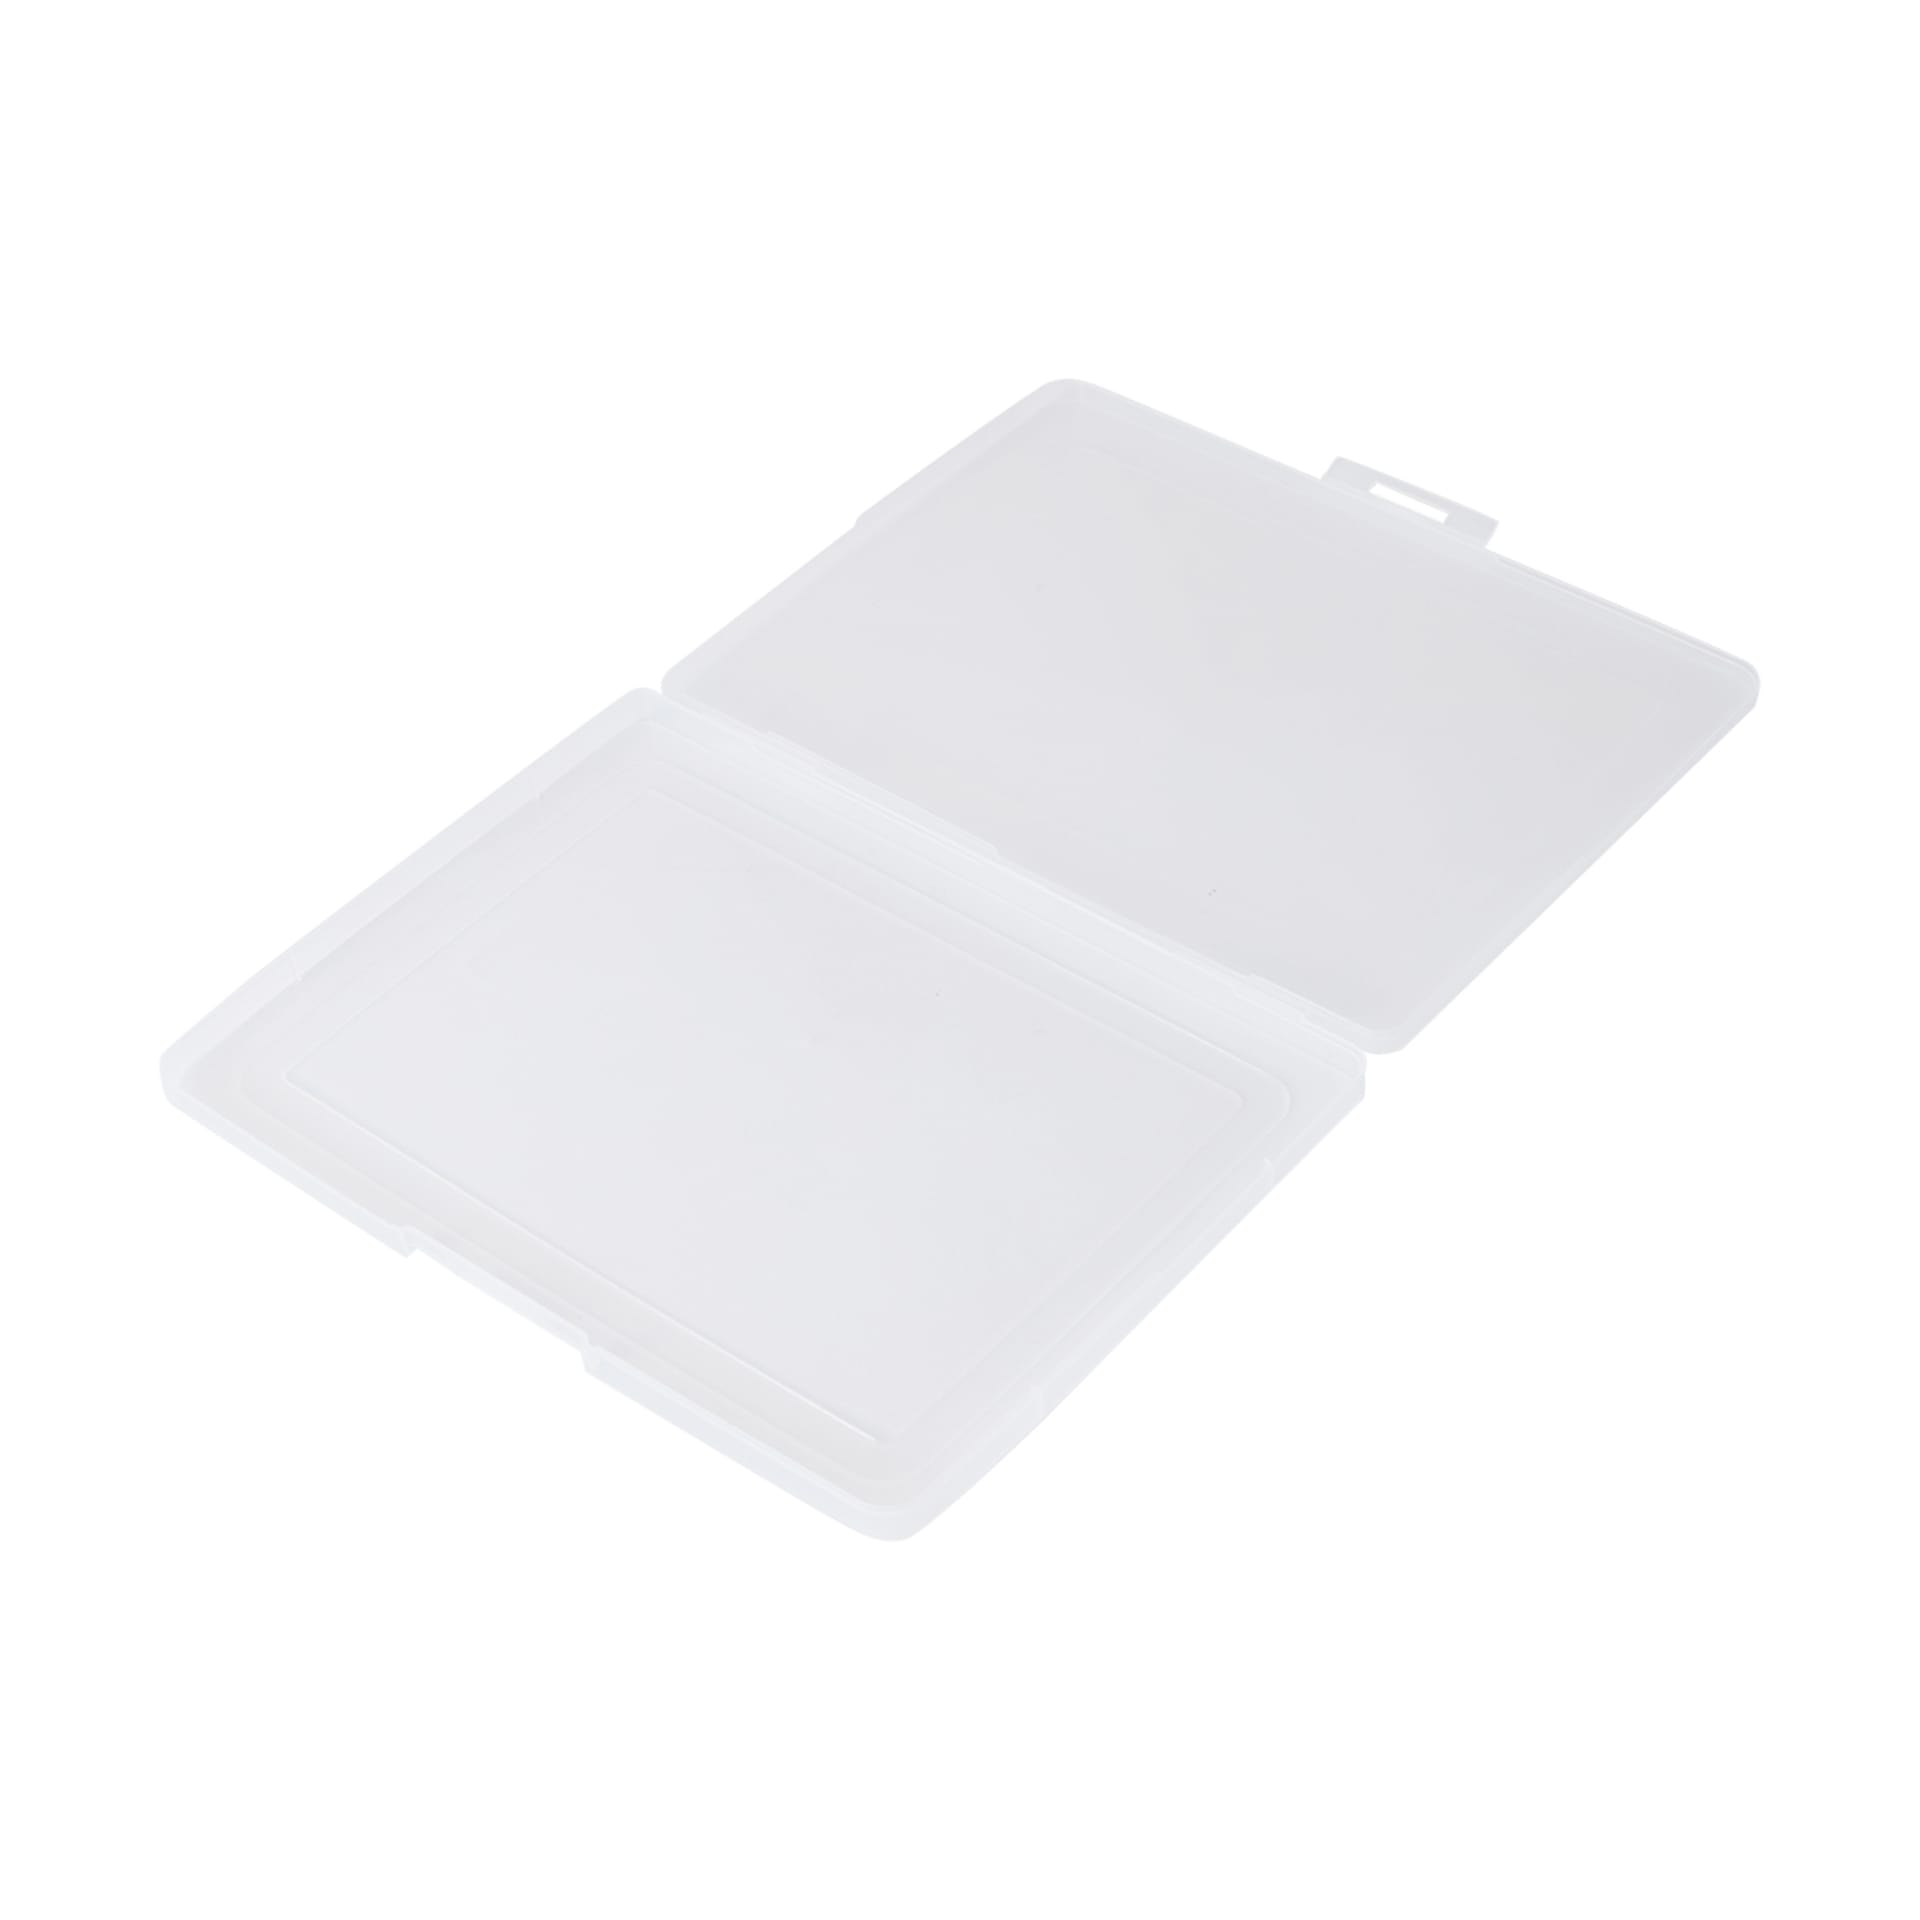 Clear Stationery Case - Kmart